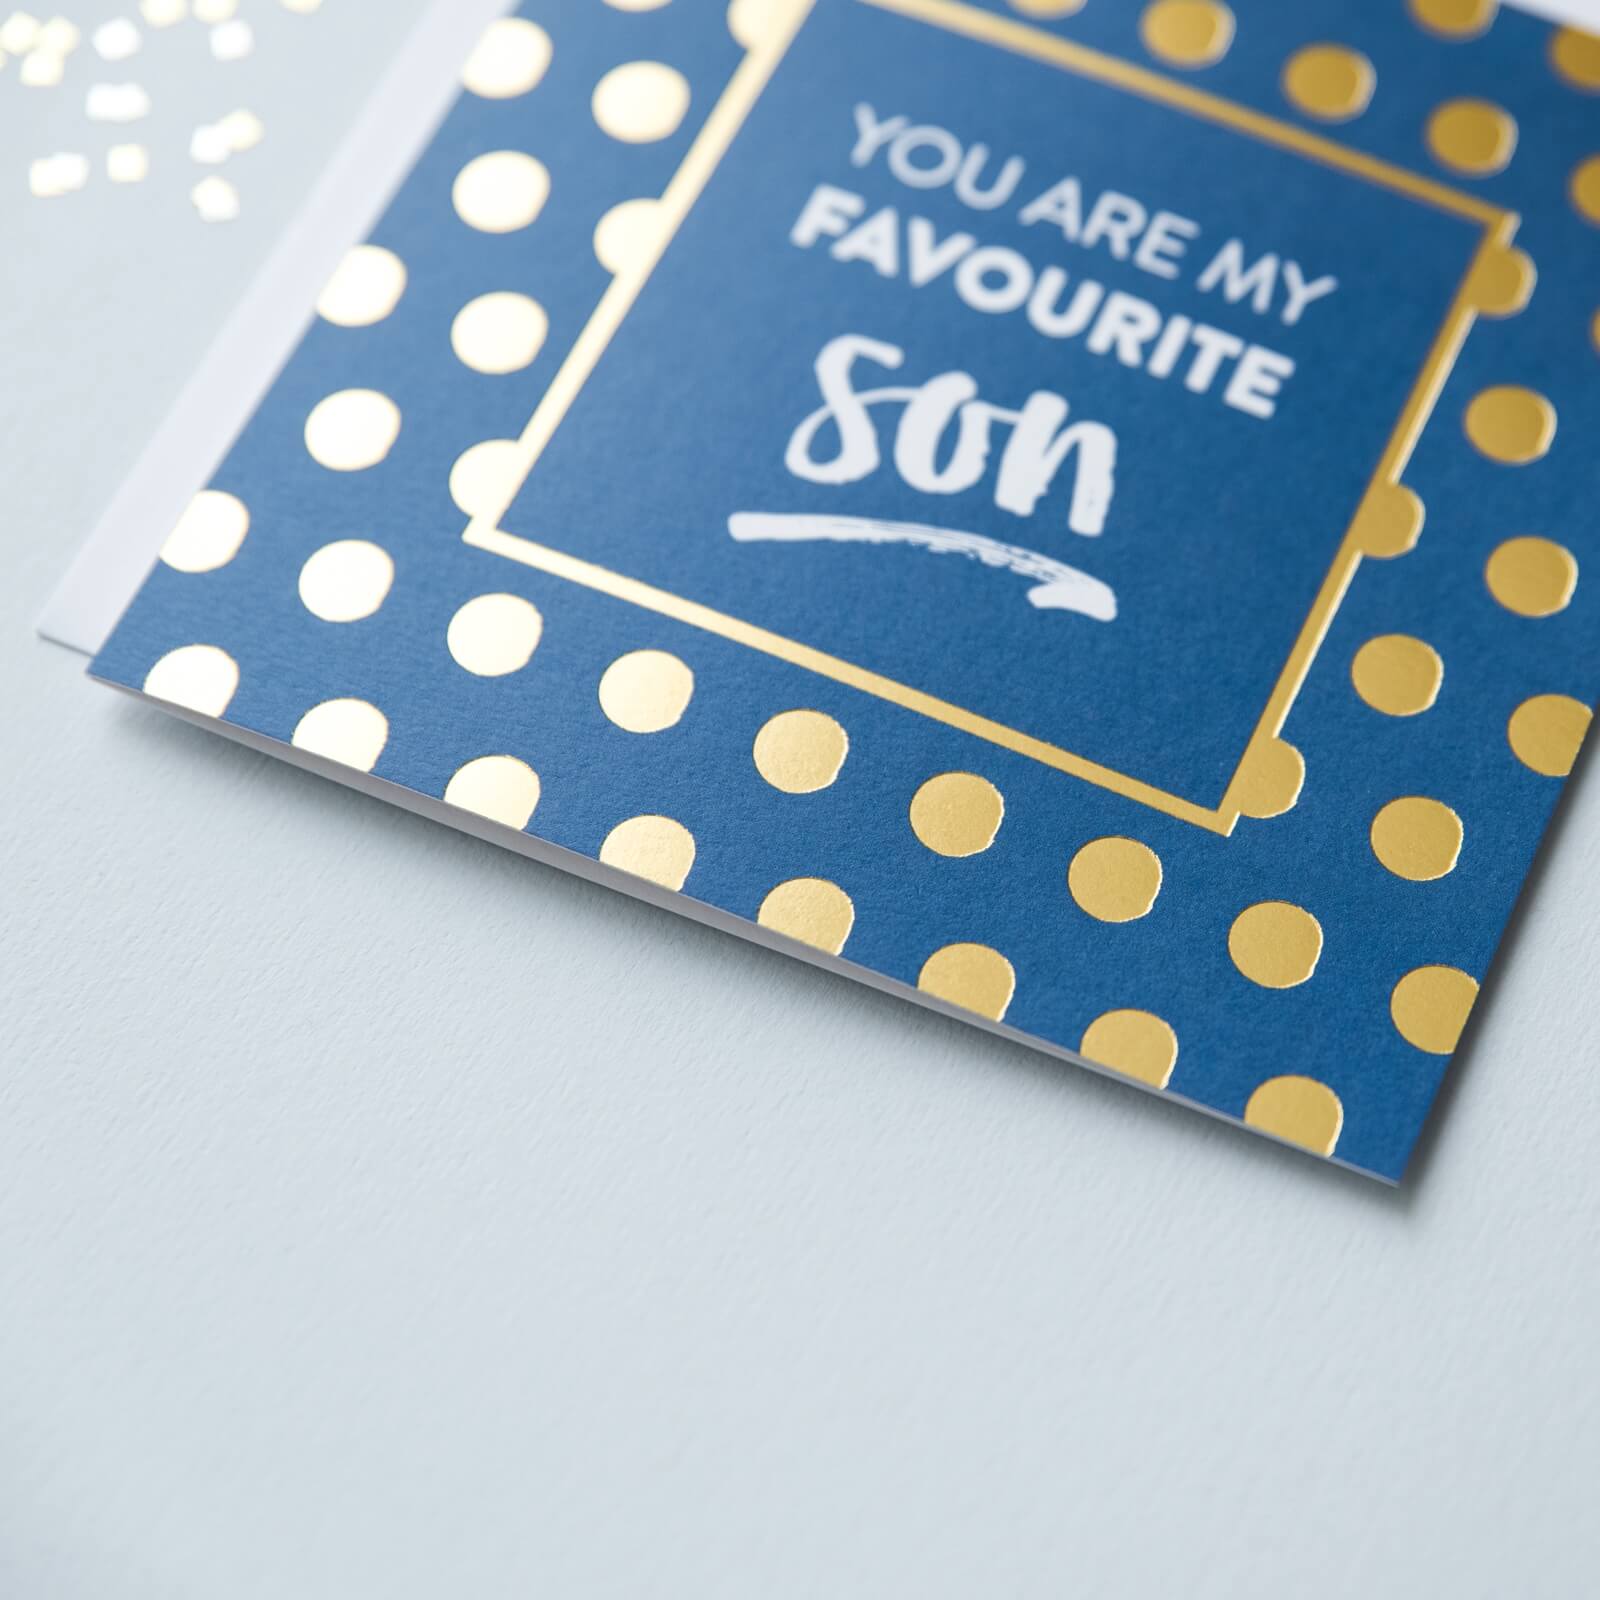 &#39;You Are My Favourite Son&#39; Gold Foil Card - I am Nat Ltd - Greeting Card